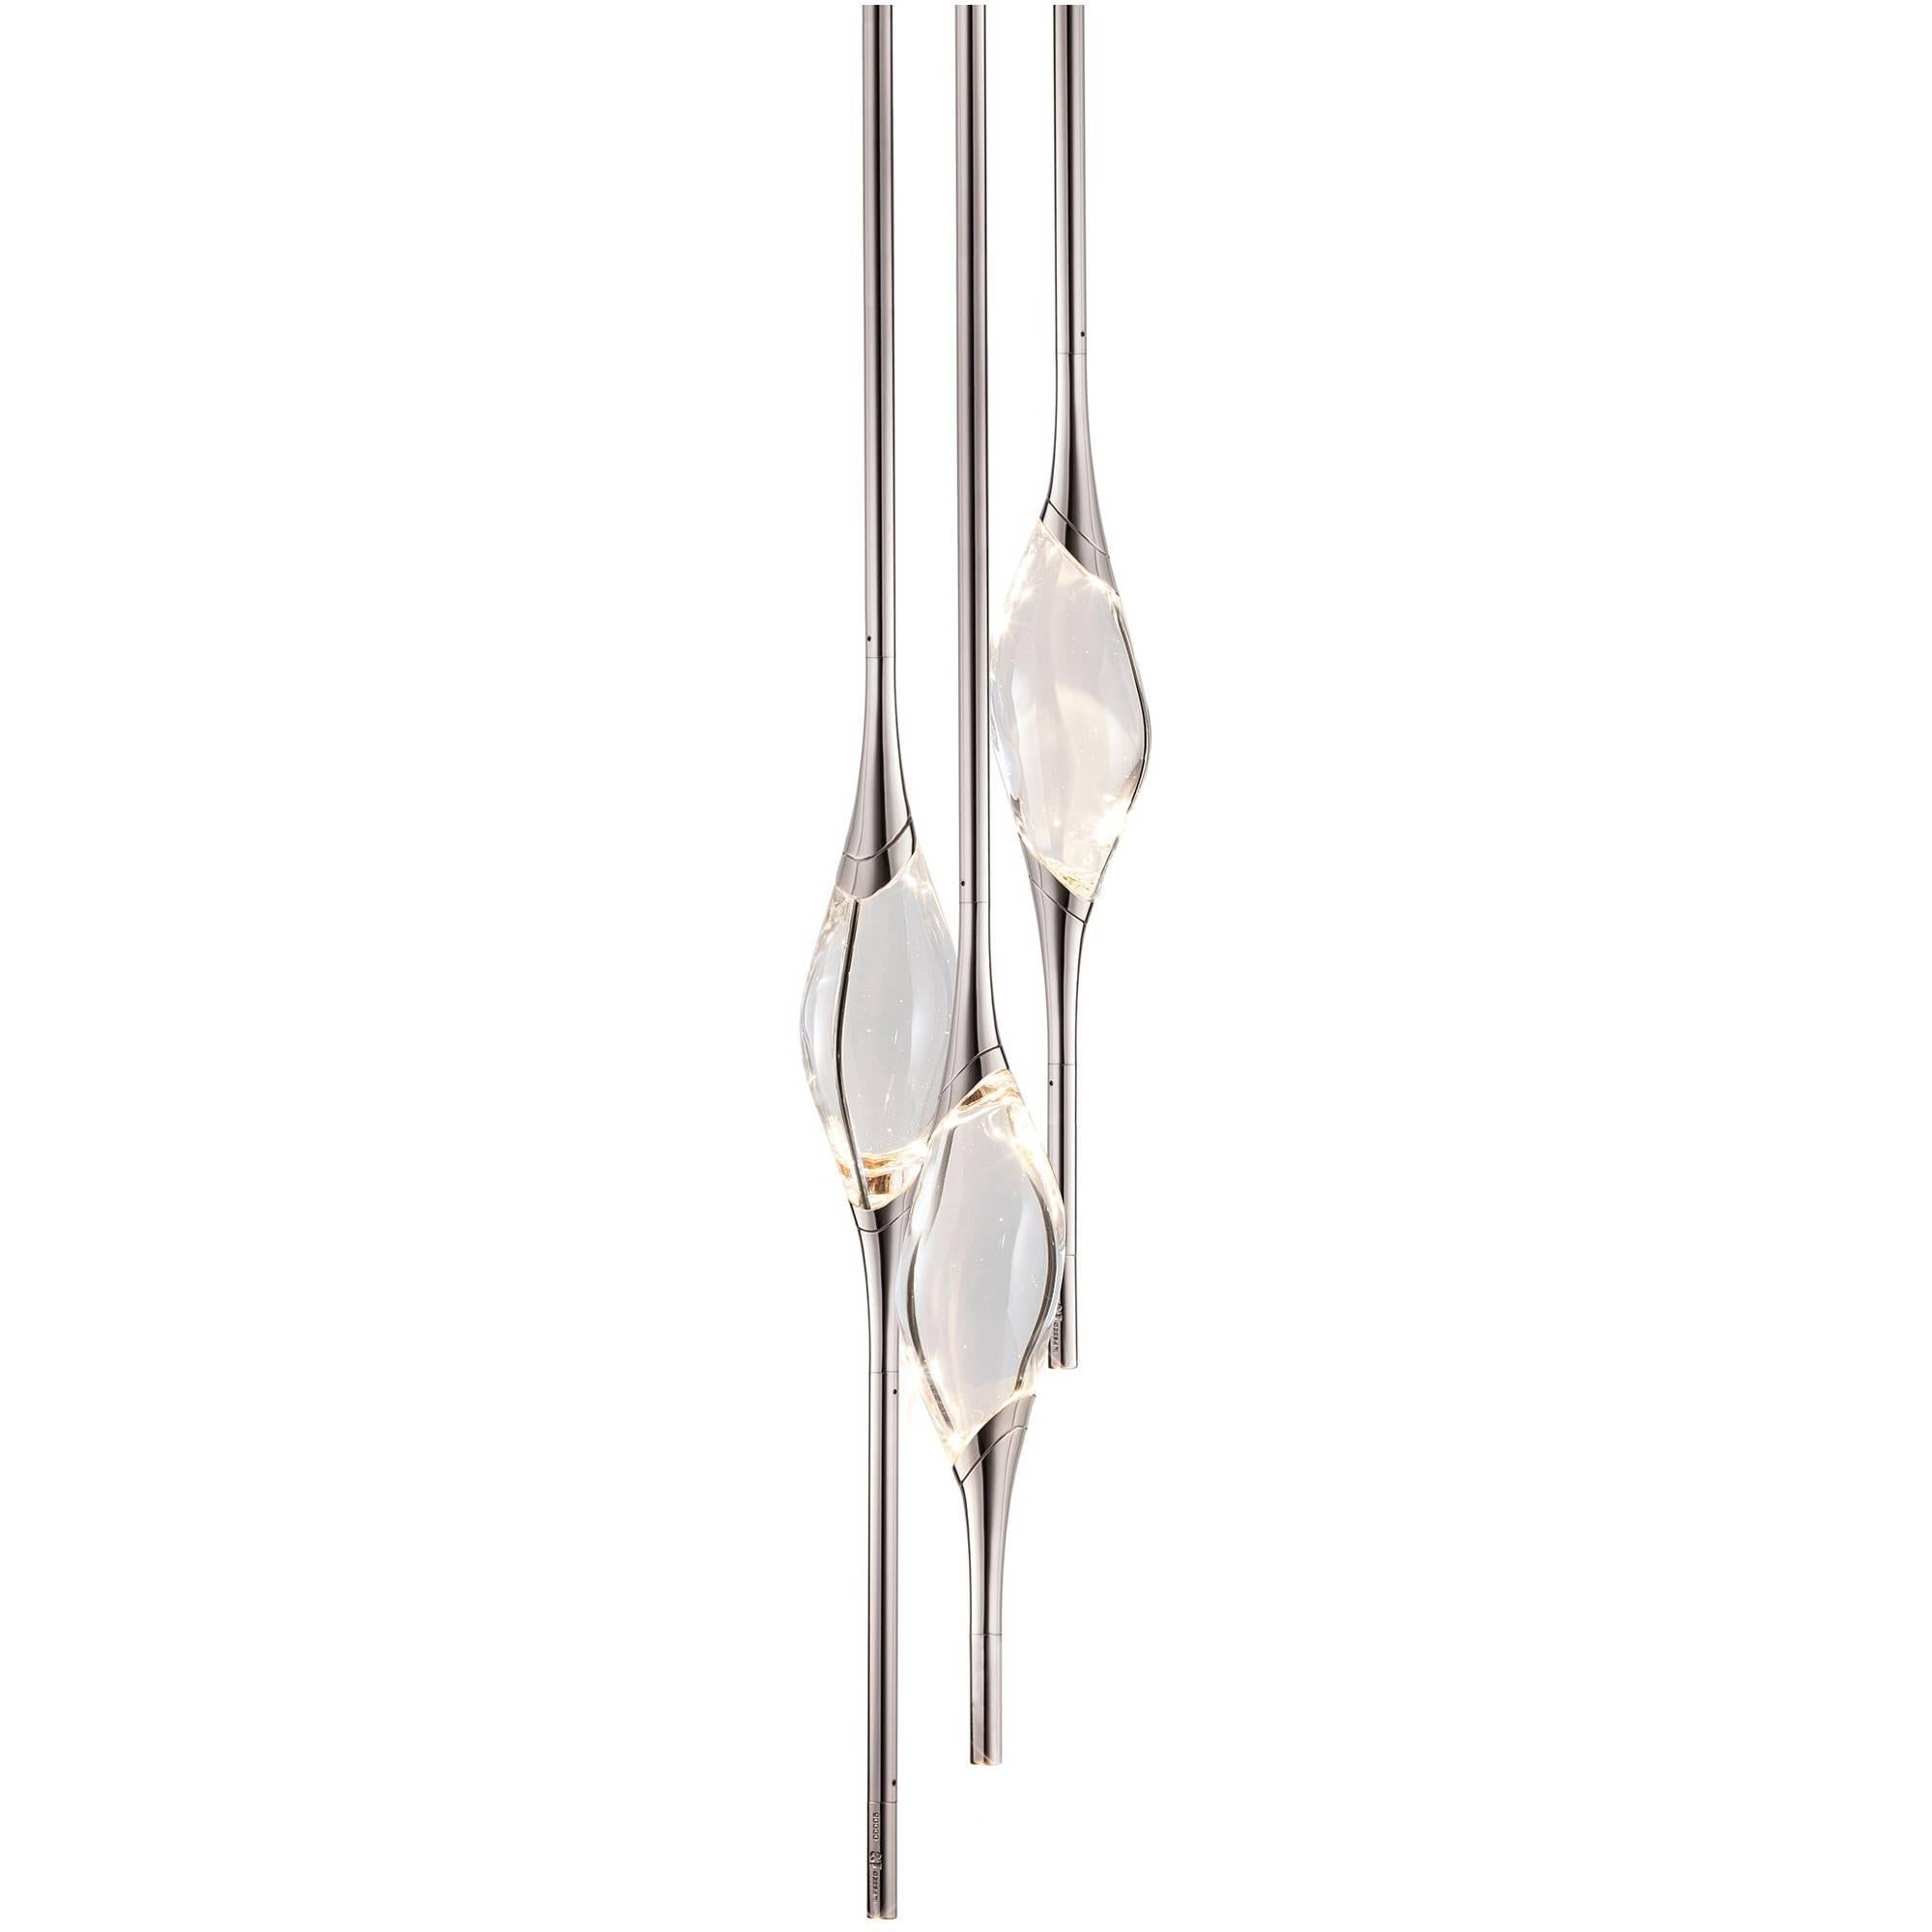 "Il Pezzo 12 Round Chandelier" - height 120cm/47.2" - nickel - crystal - LEDs For Sale